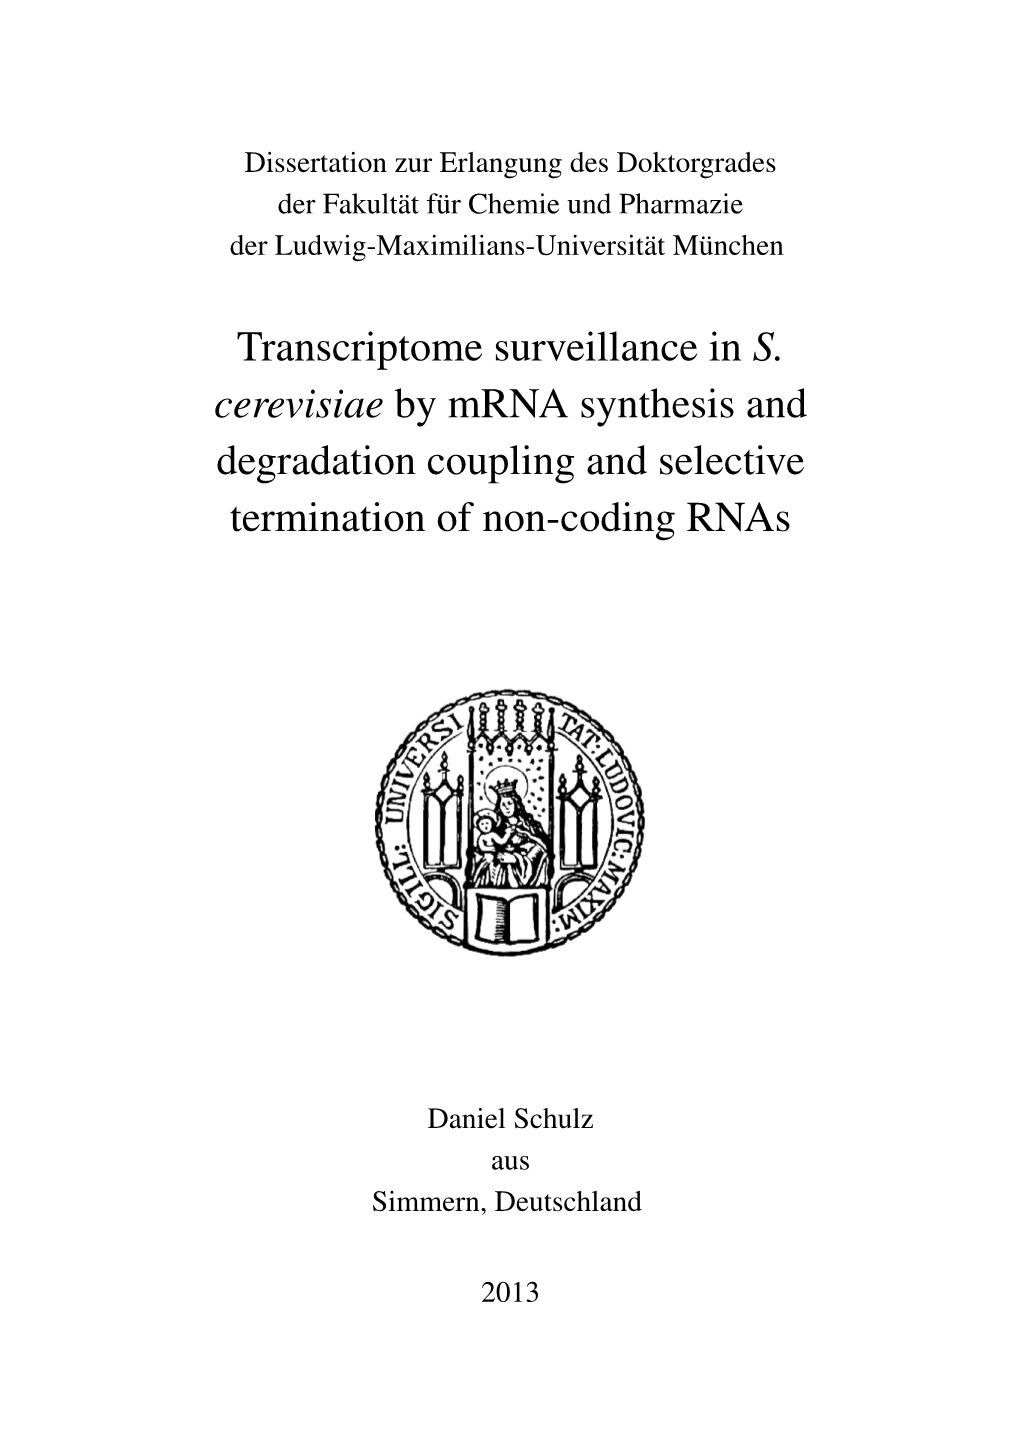 Transcriptome Surveillance in S. Cerevisiae by Mrna Synthesis and Degradation Coupling and Selective Termination of Non-Coding Rnas